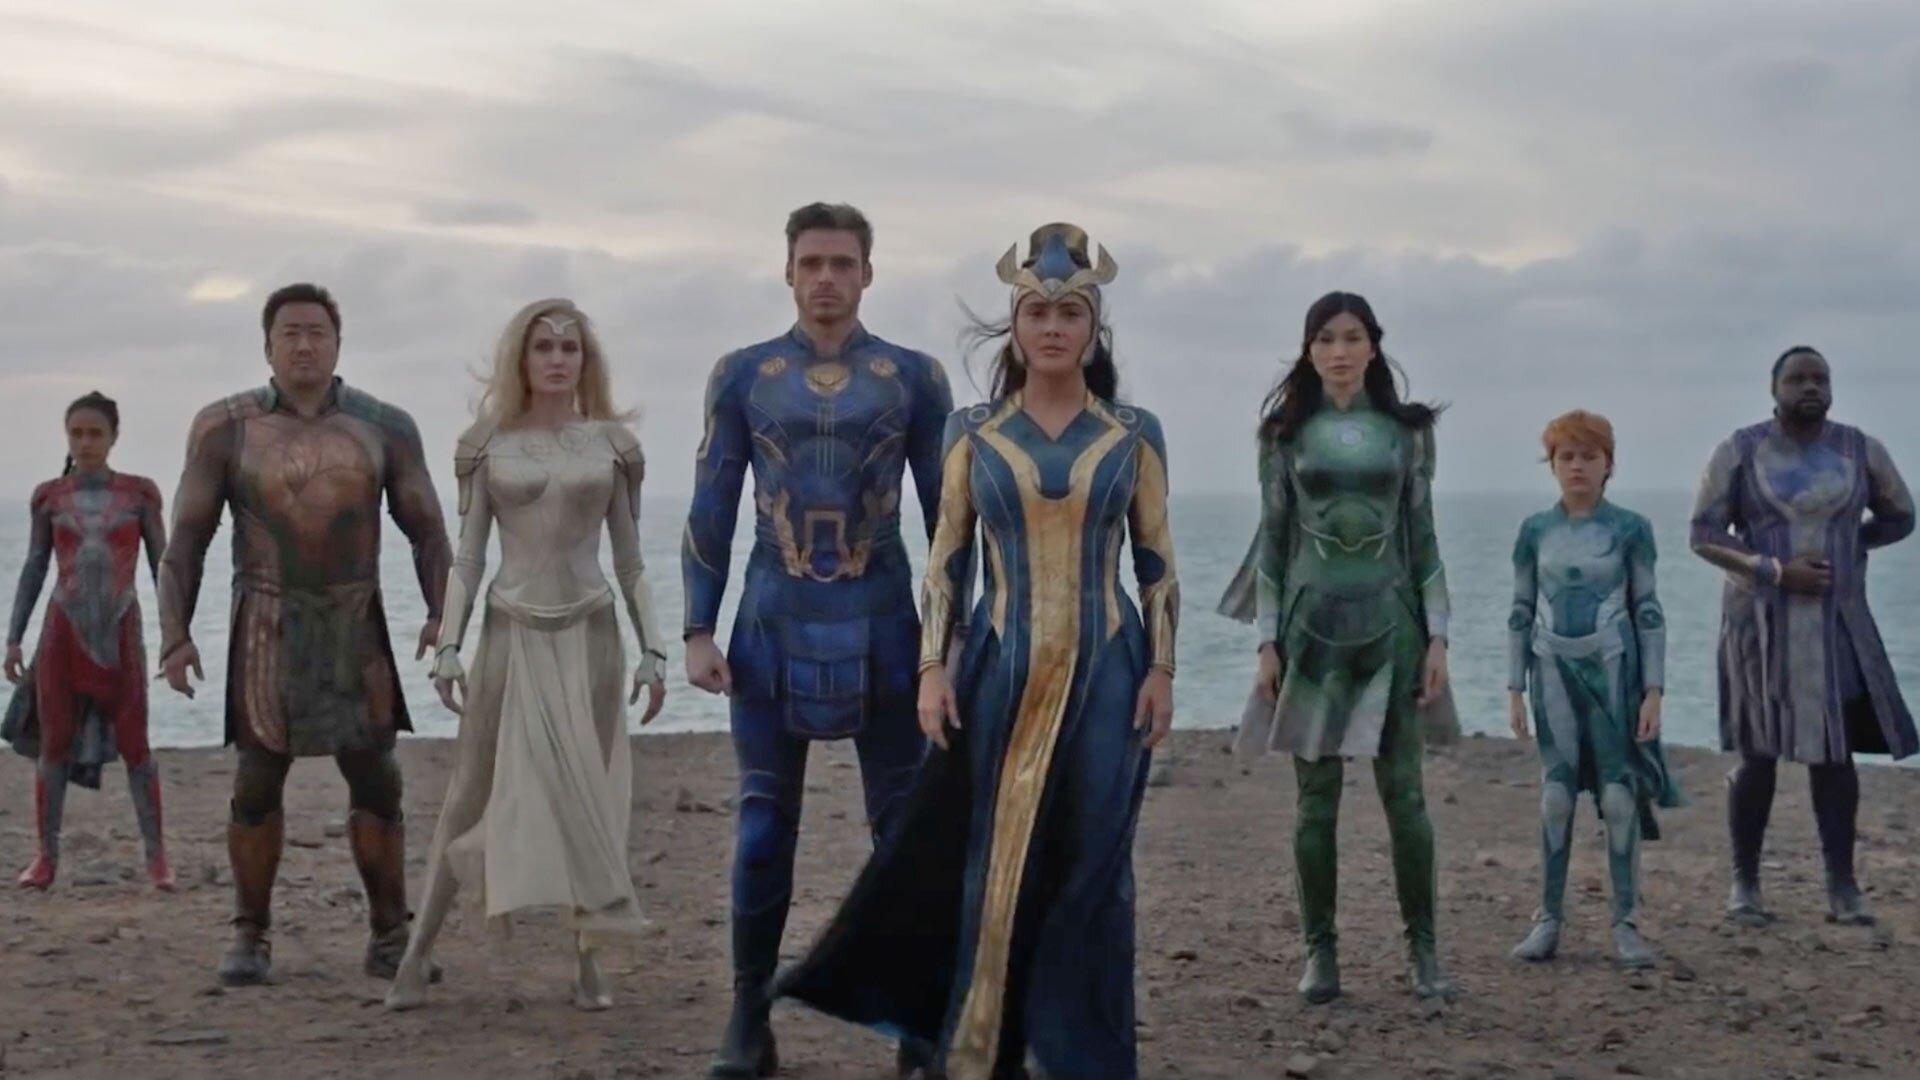 Marvel's Eternals Trailer: Salma Hayek, Angelina Jolie and Richard Madden Suit Up to Save the World